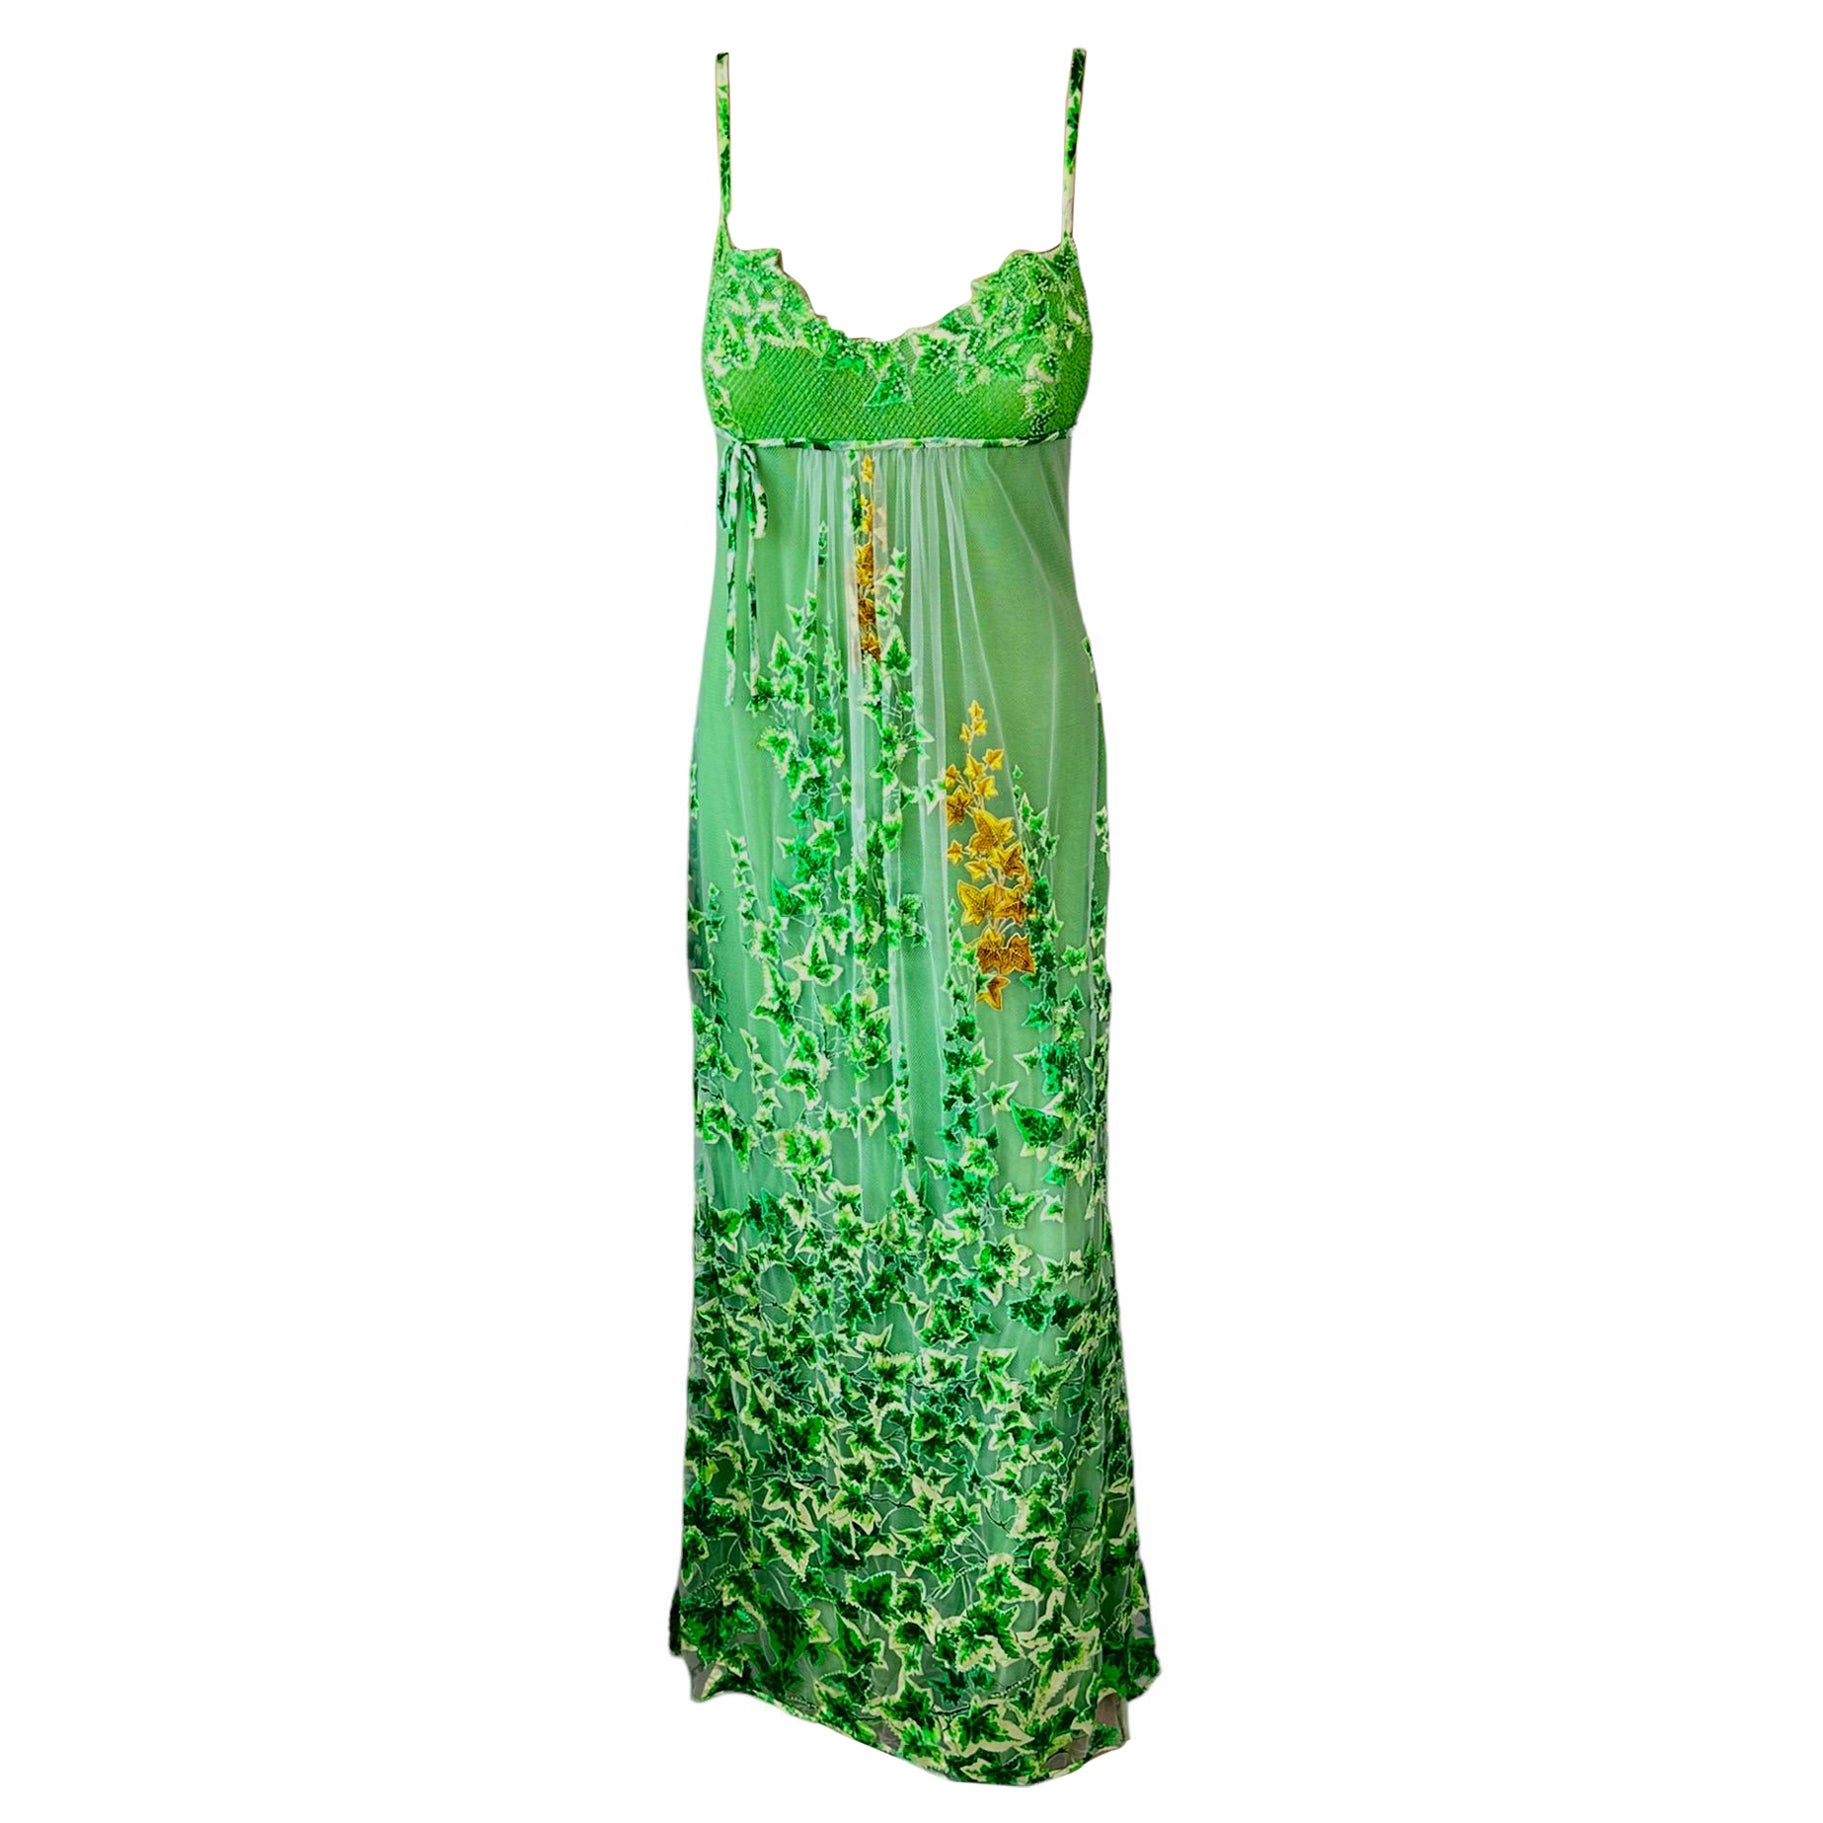 Gianni Versace S/S 1997 Runway Embellished Sheer Lace Shawl Evening Dress Gown  For Sale